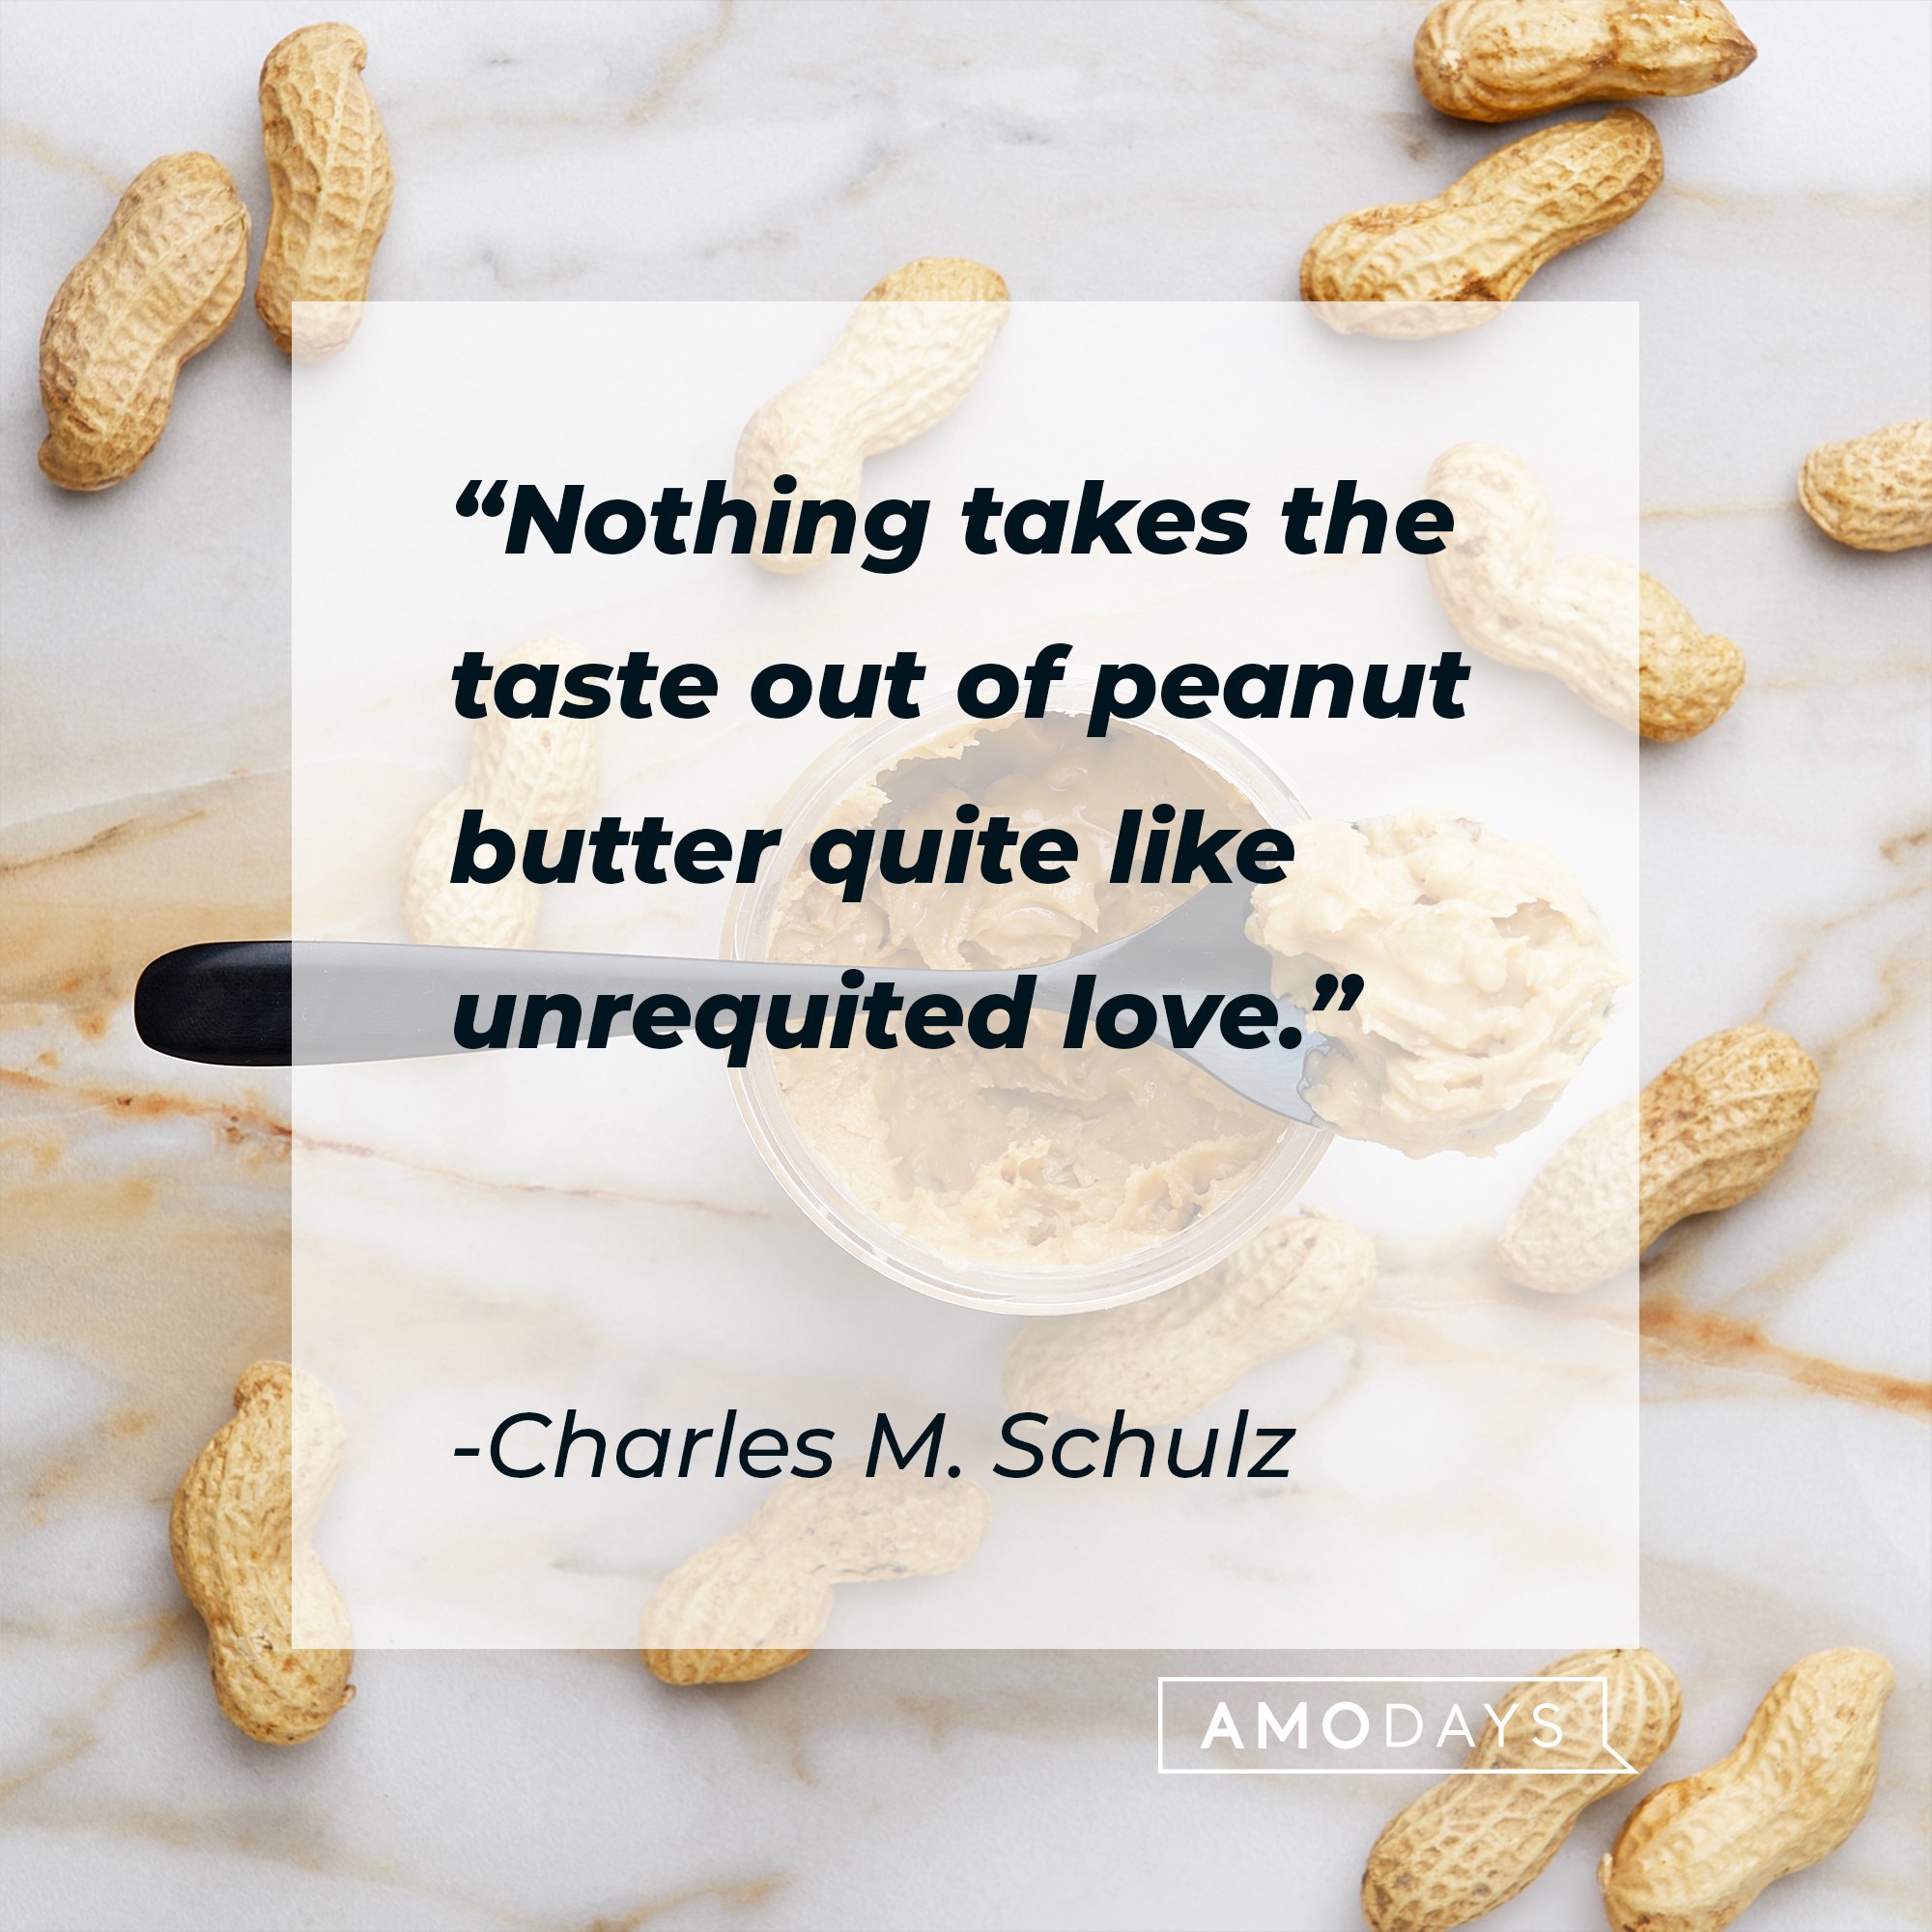 Charles M. Schulz's quote: "Nothing takes the taste out of peanut butter quite like unrequited love." | Image: AmoDays